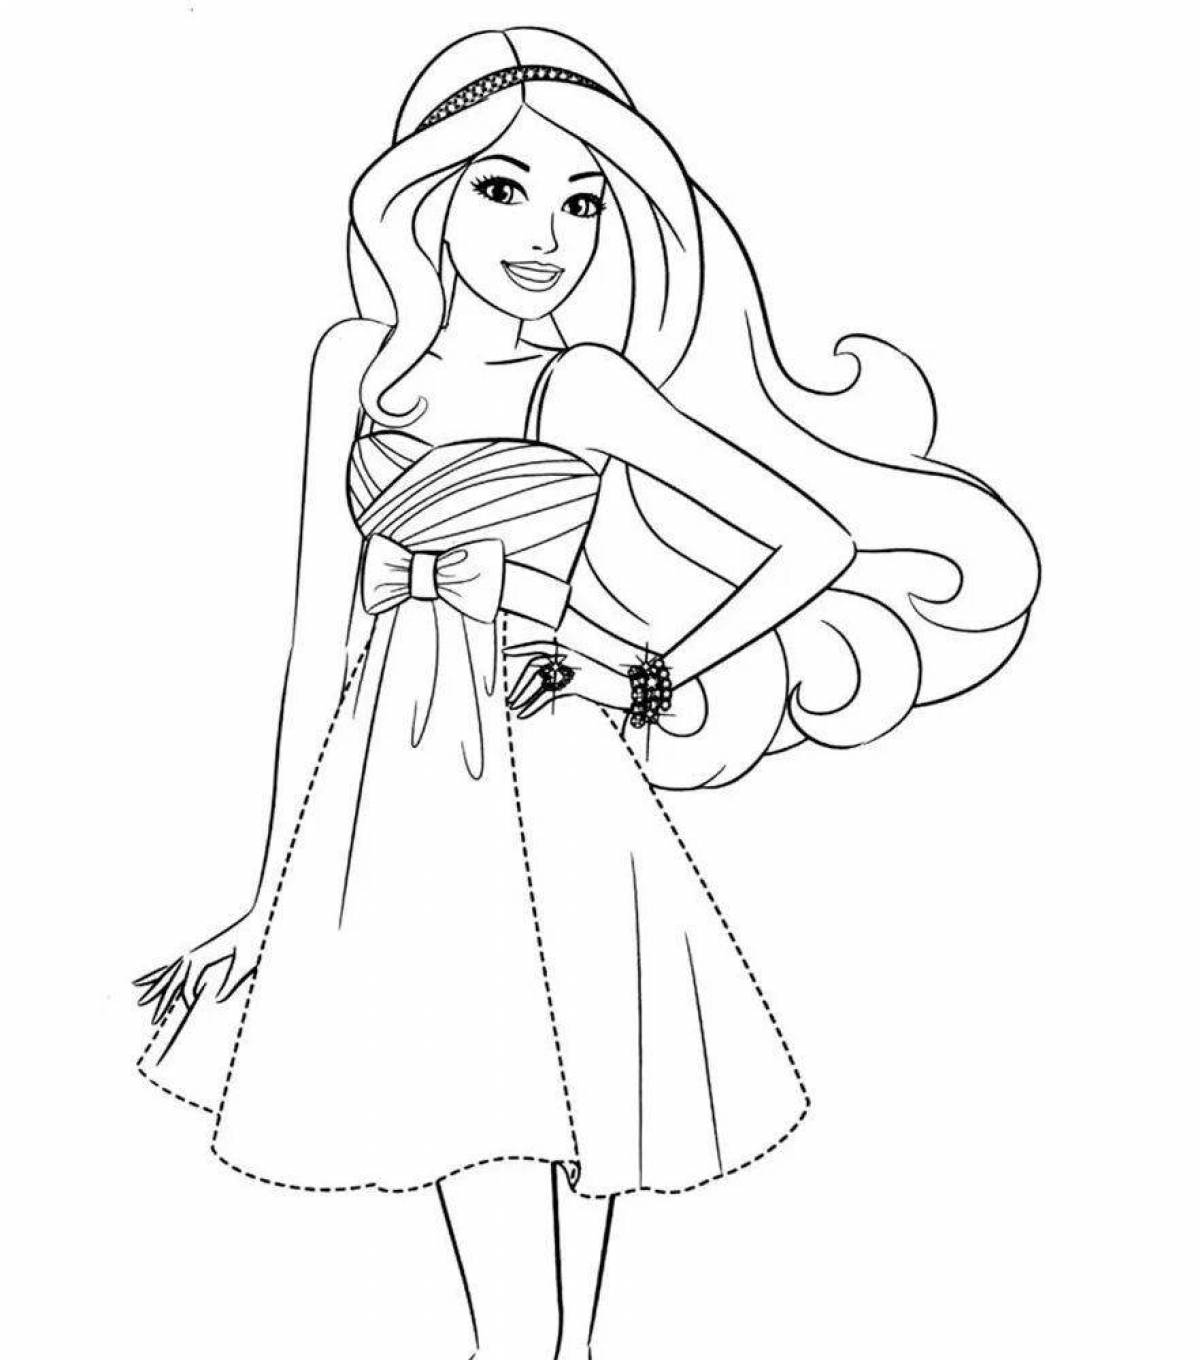 Bright barbie coloring page